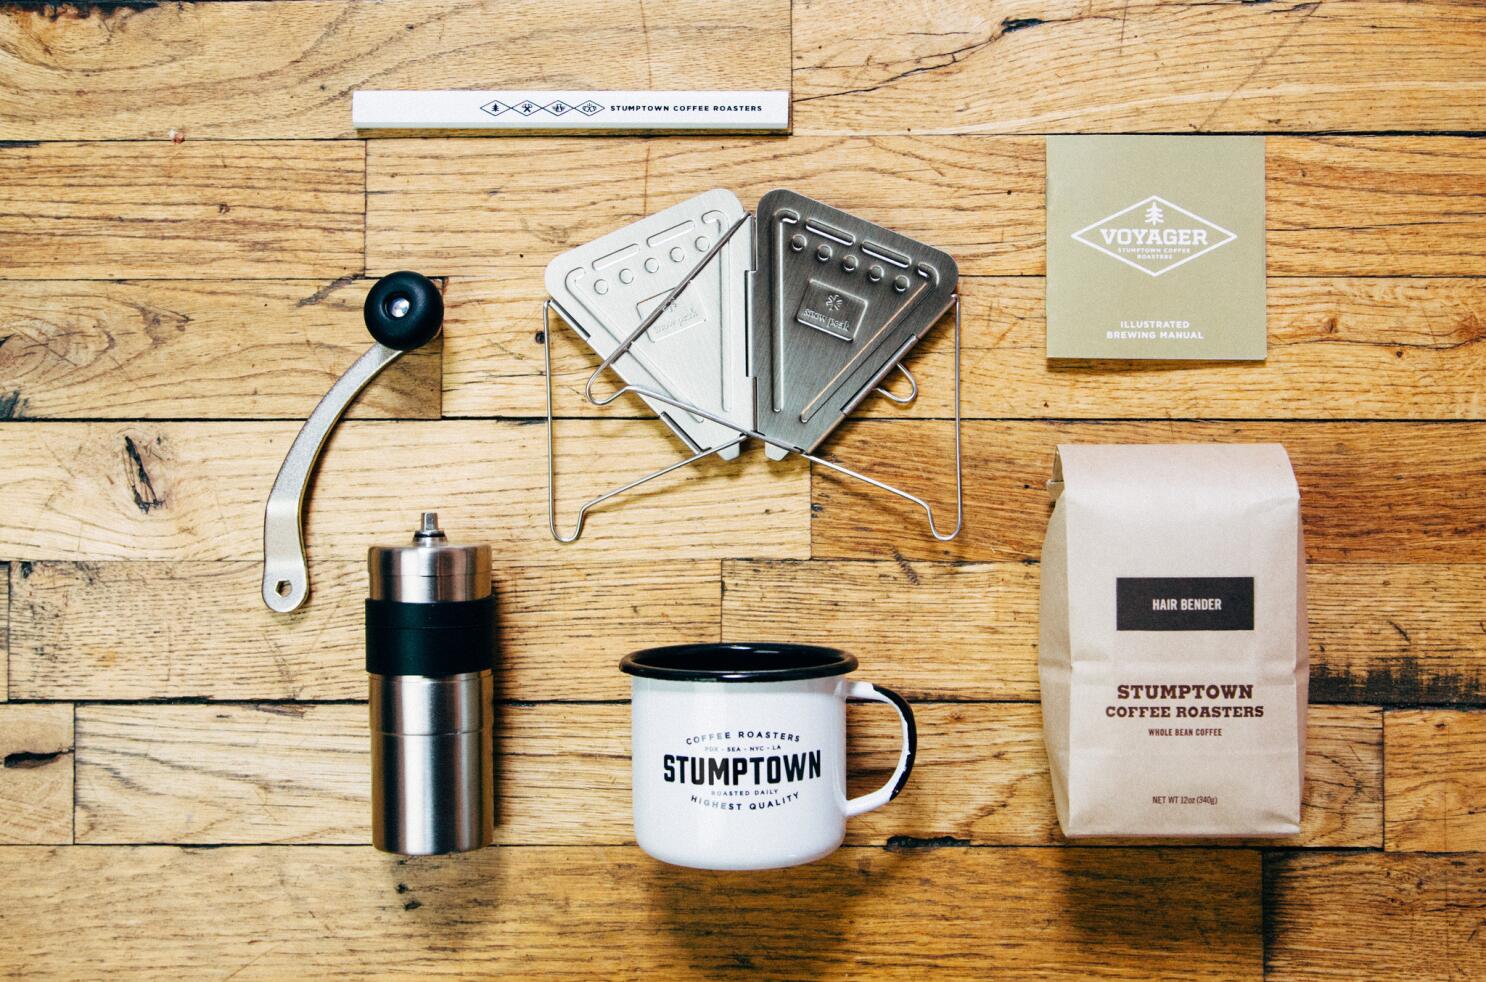 Stumptown's Voyager brew kit for making coffee on the go - Los